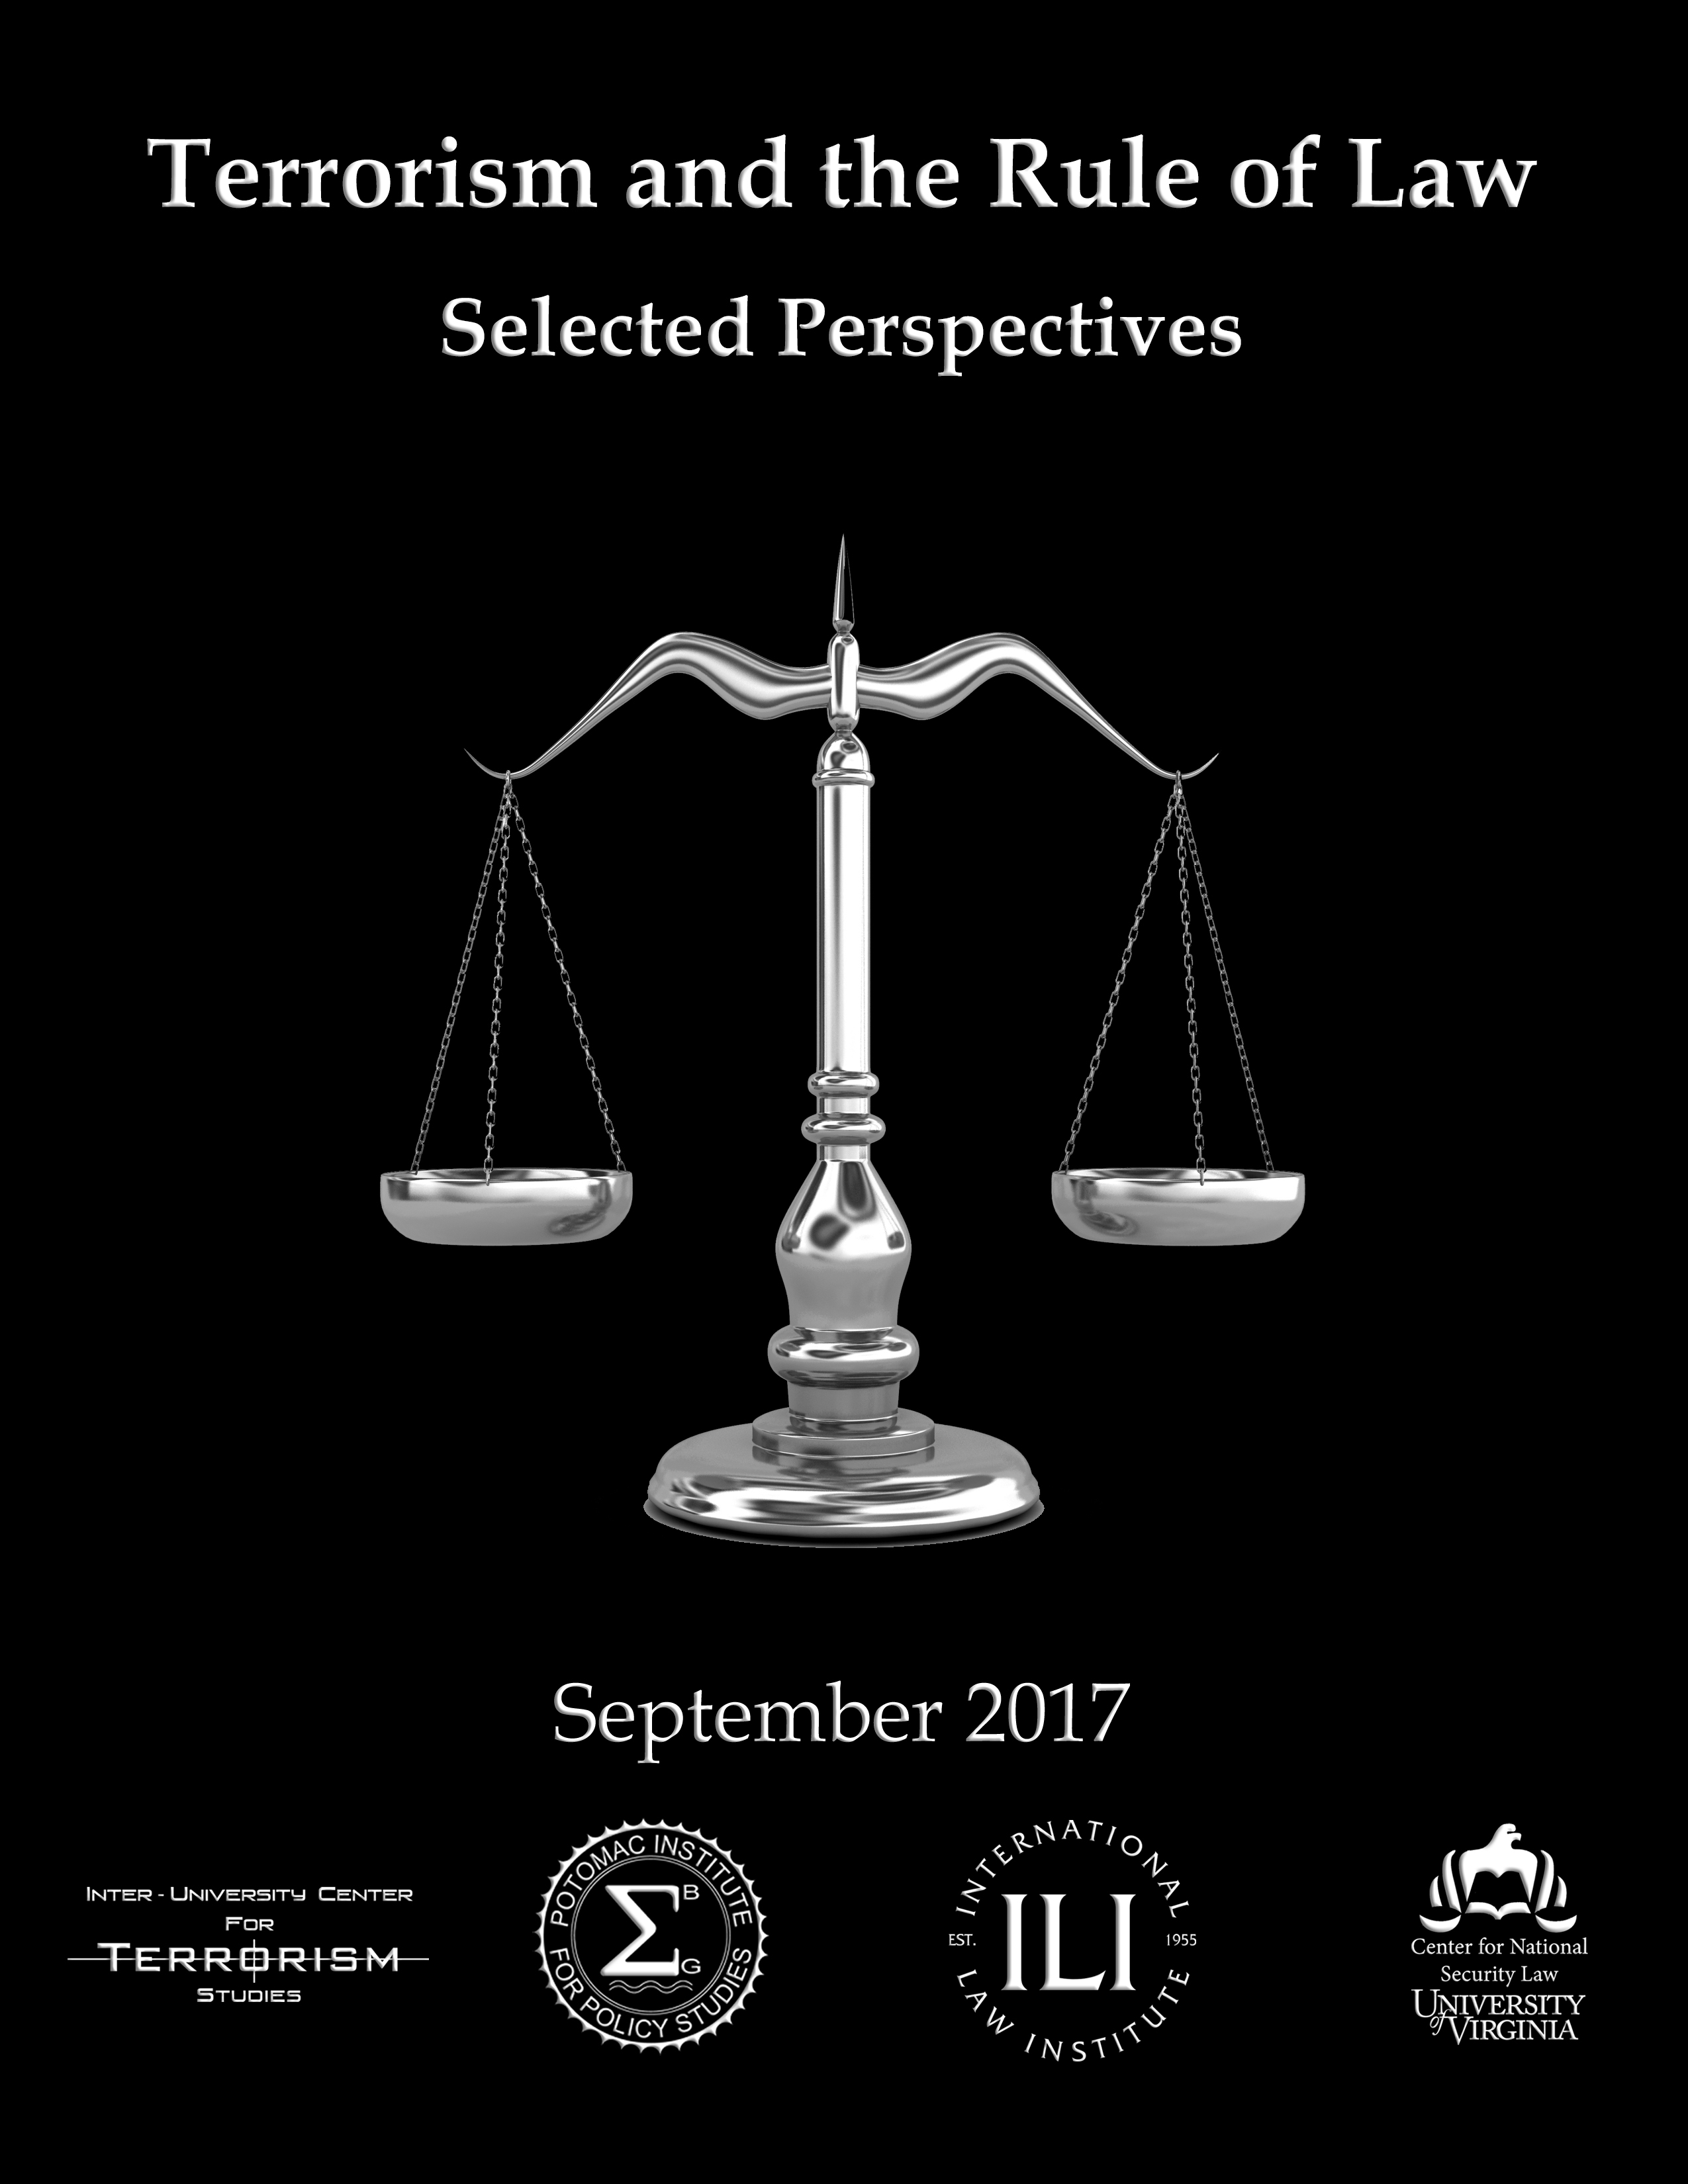 Terrorism and the Rule of Law: Selected Perspectives